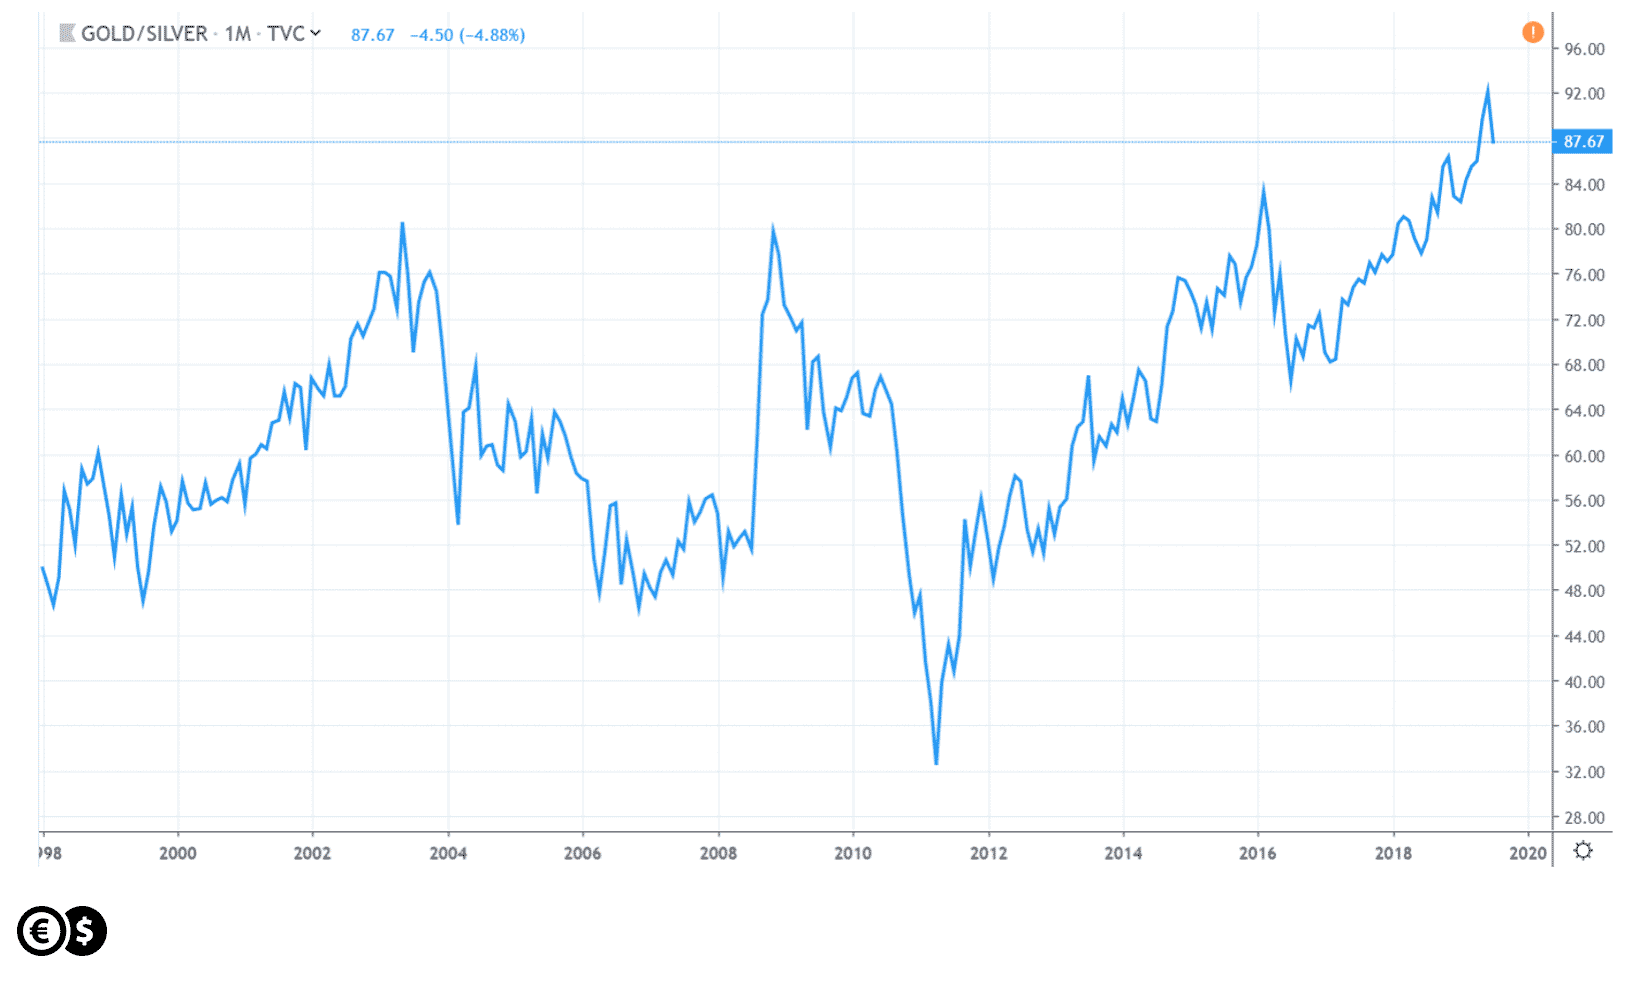 Gold/silver ratio over years